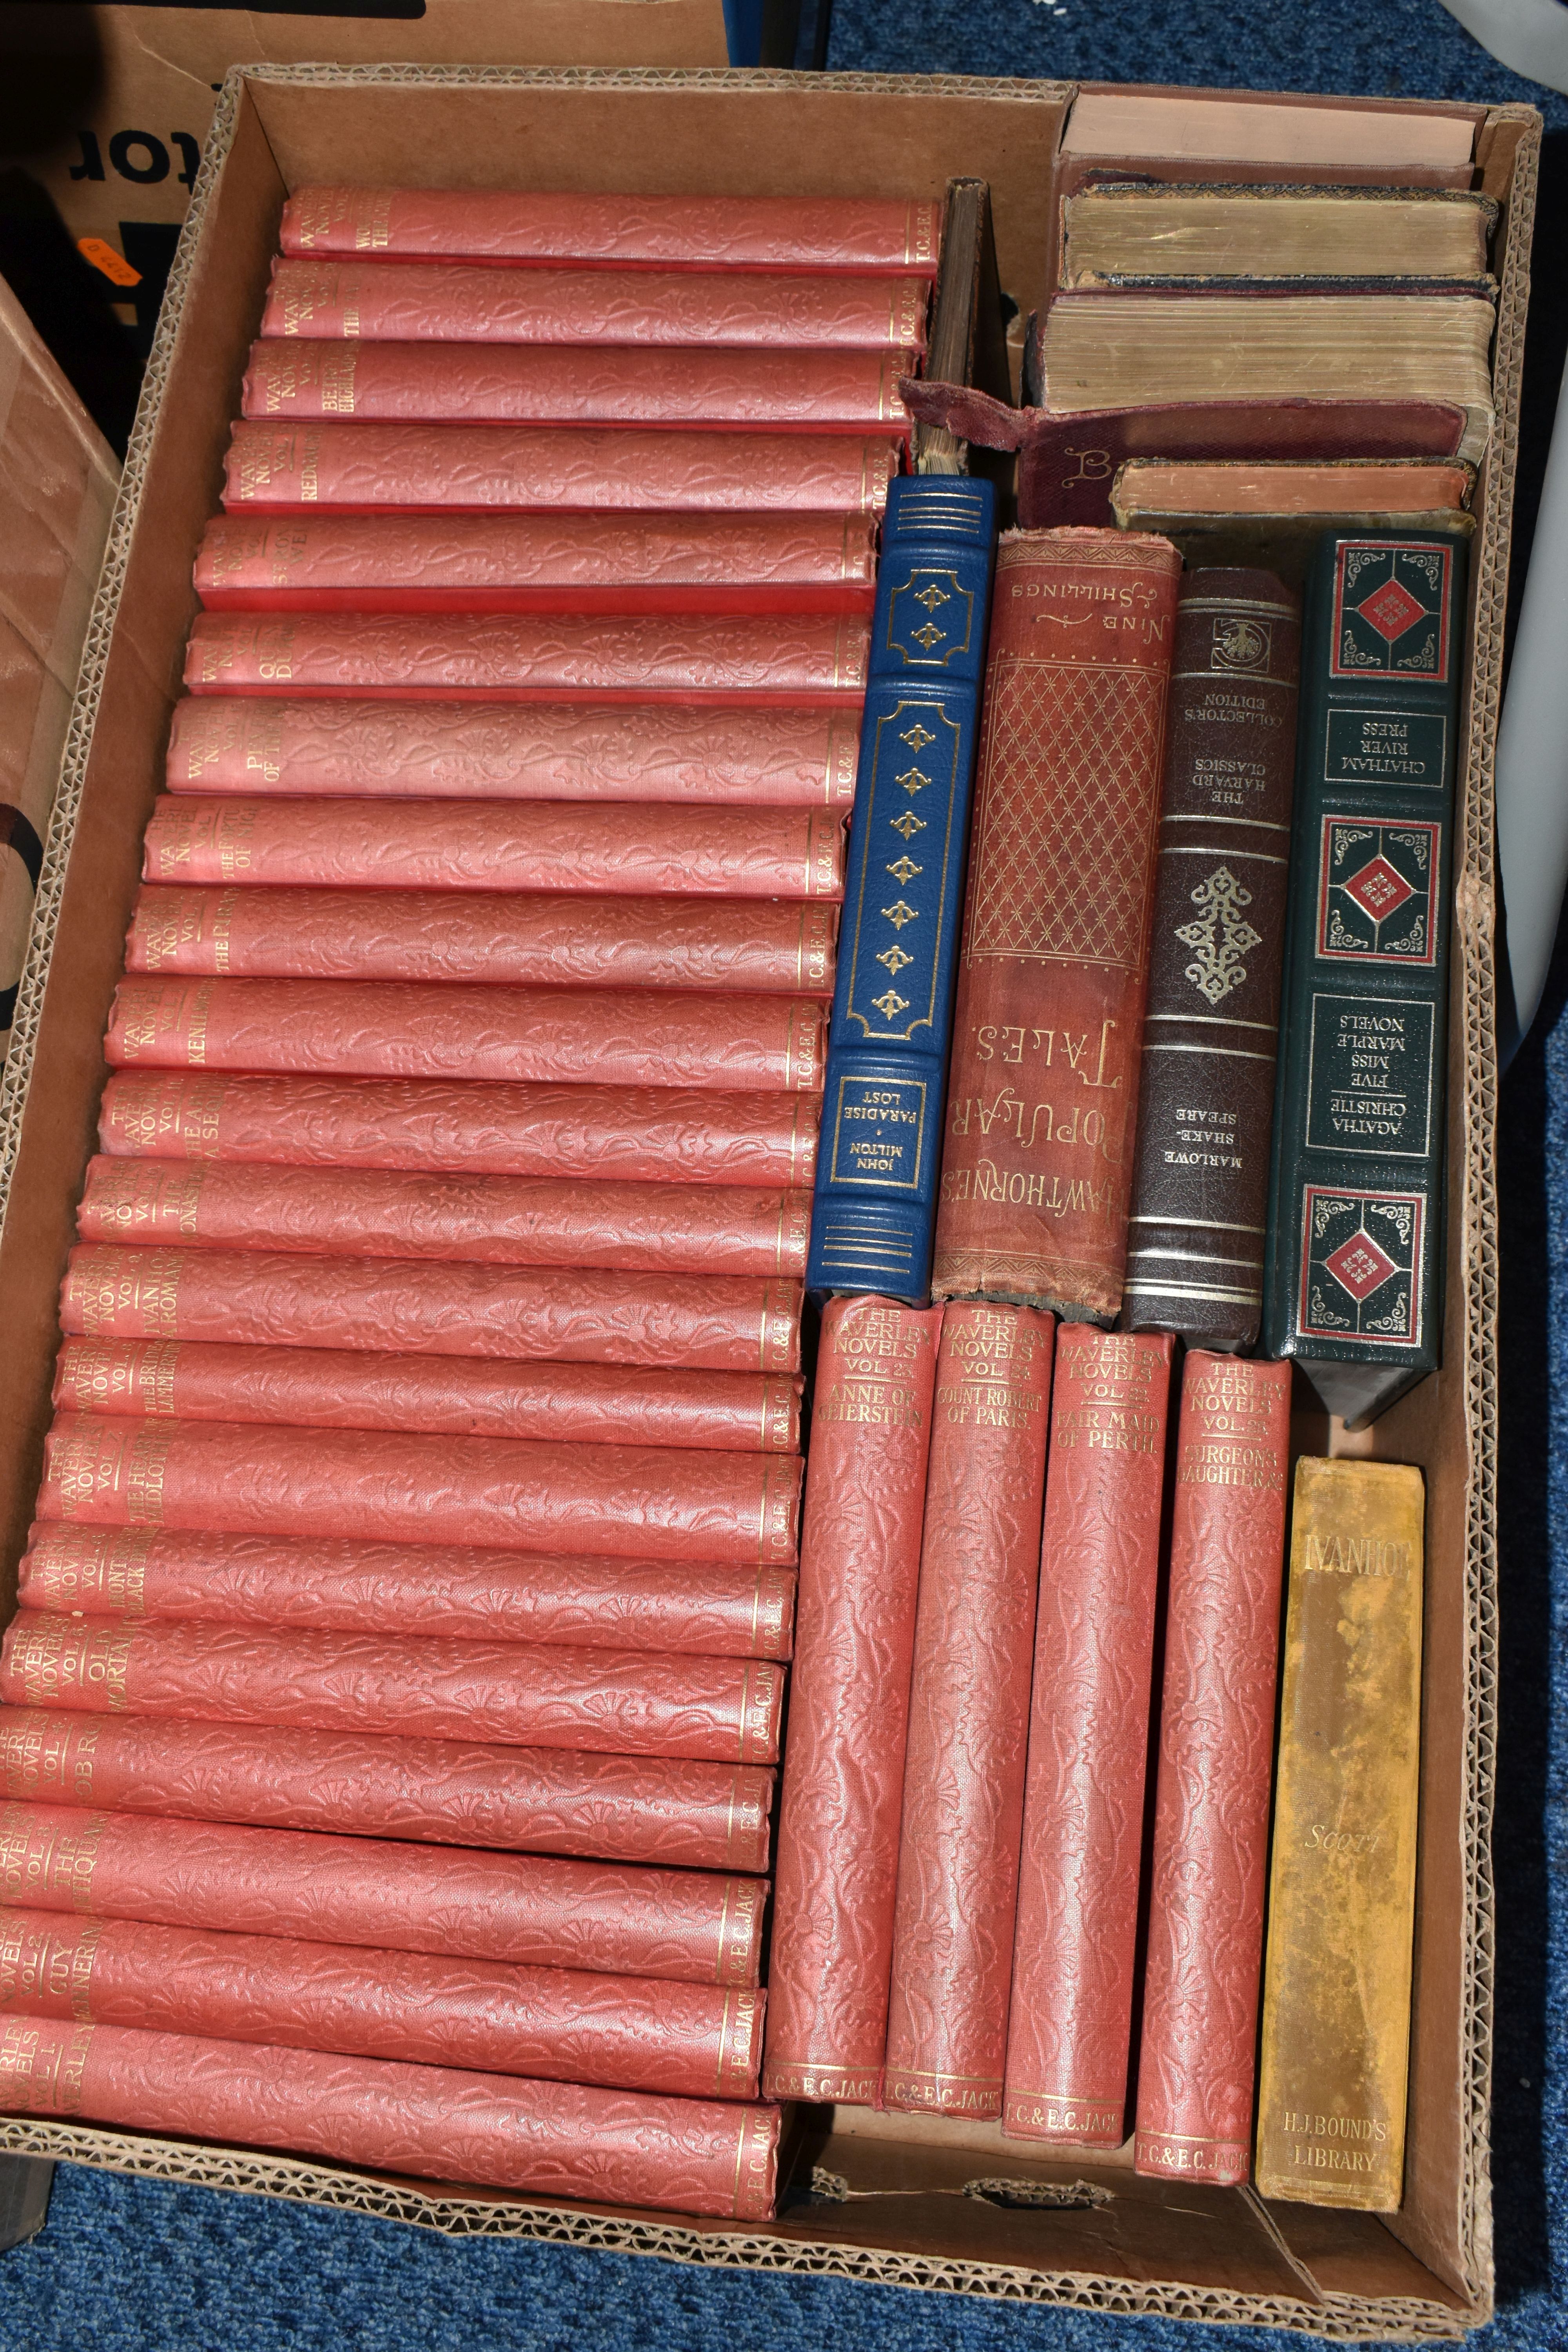 FOUR BOXES OF BOOKS containing approximately 108 miscellaneous titles in hardback format and - Image 5 of 6